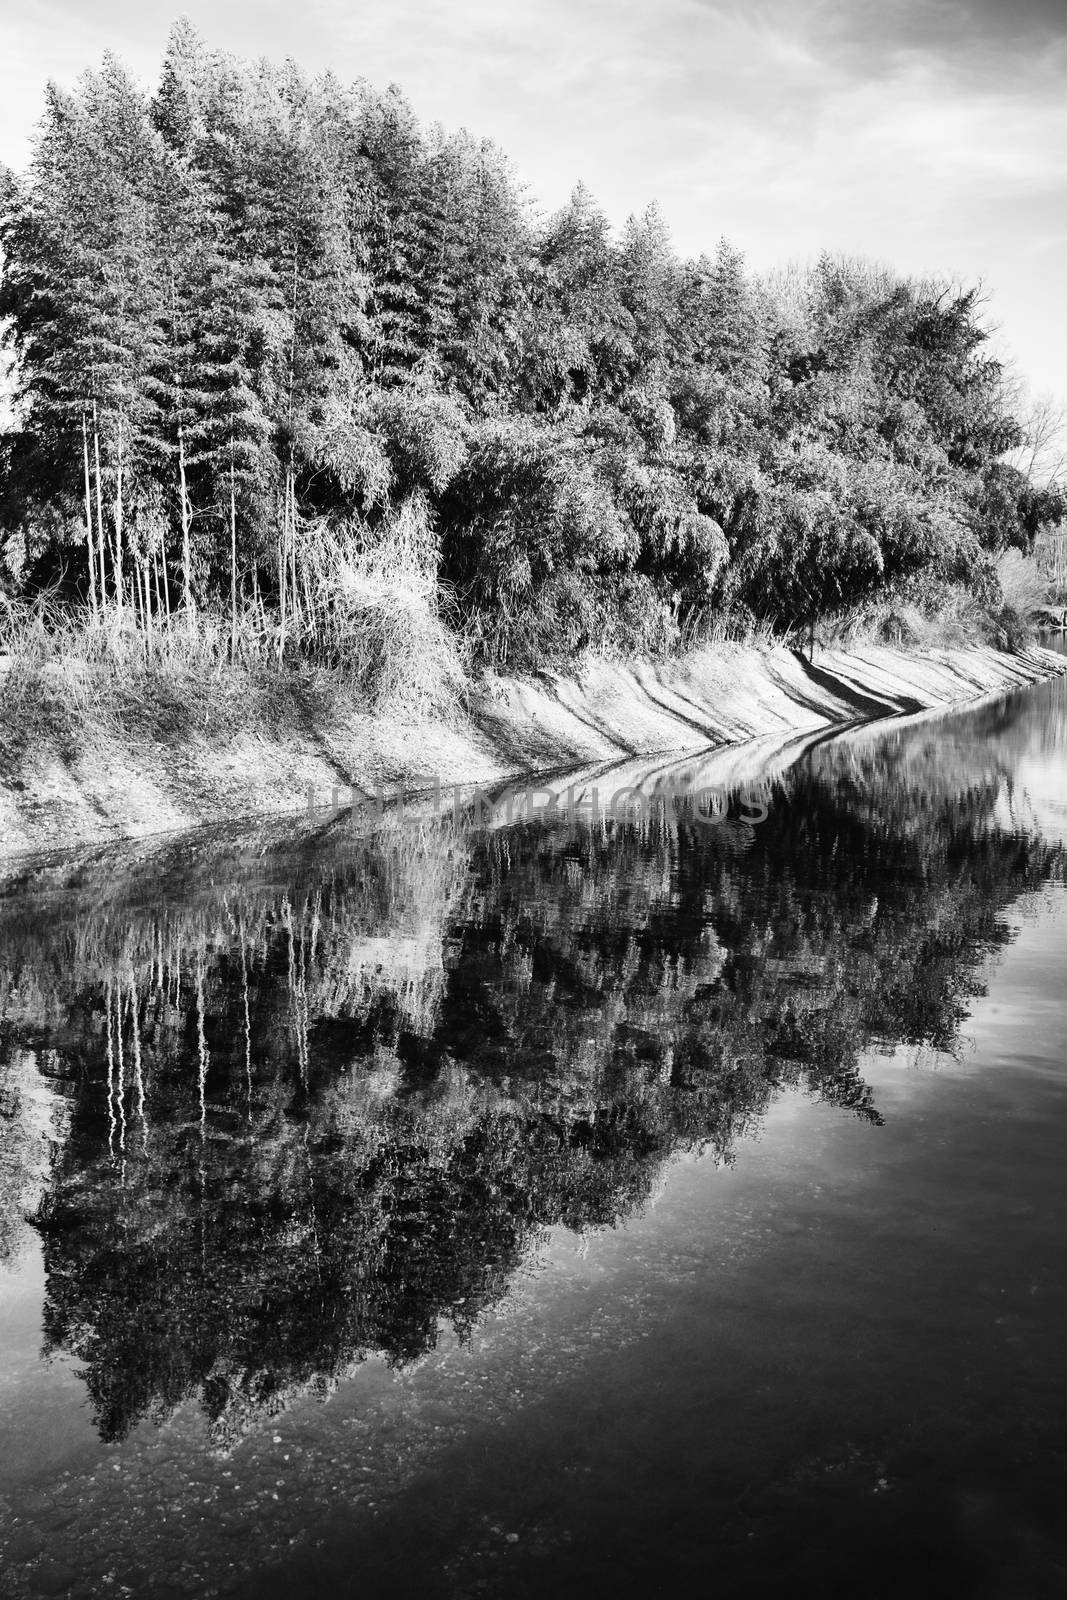 Black and White image of small pond with trees reflection on water